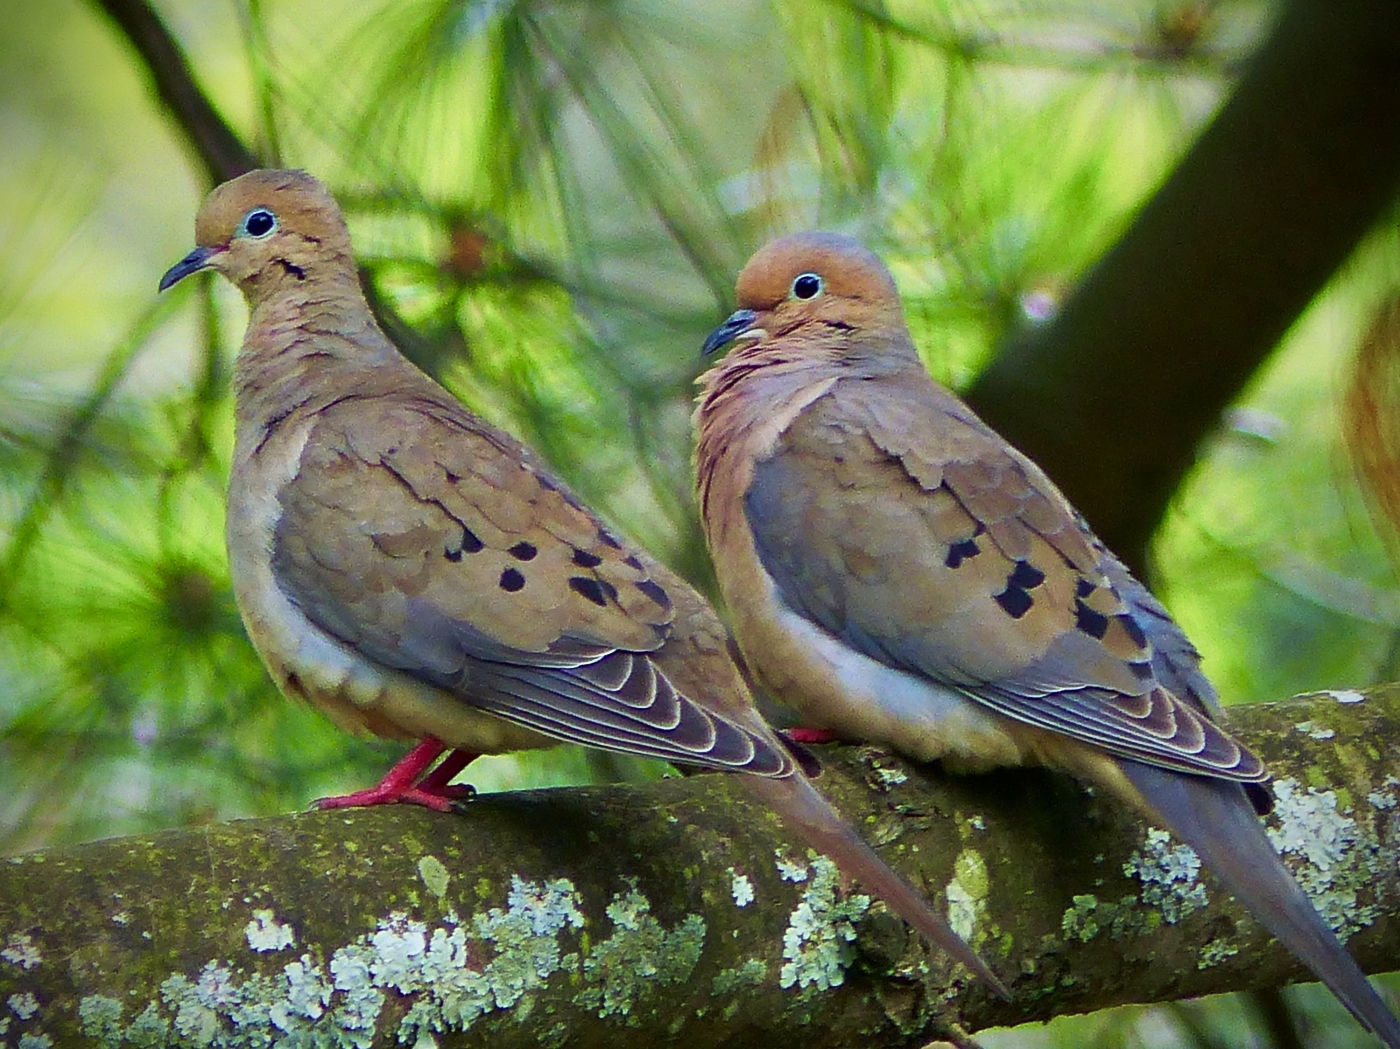 Mourning Dove Mates by Gary Gianini